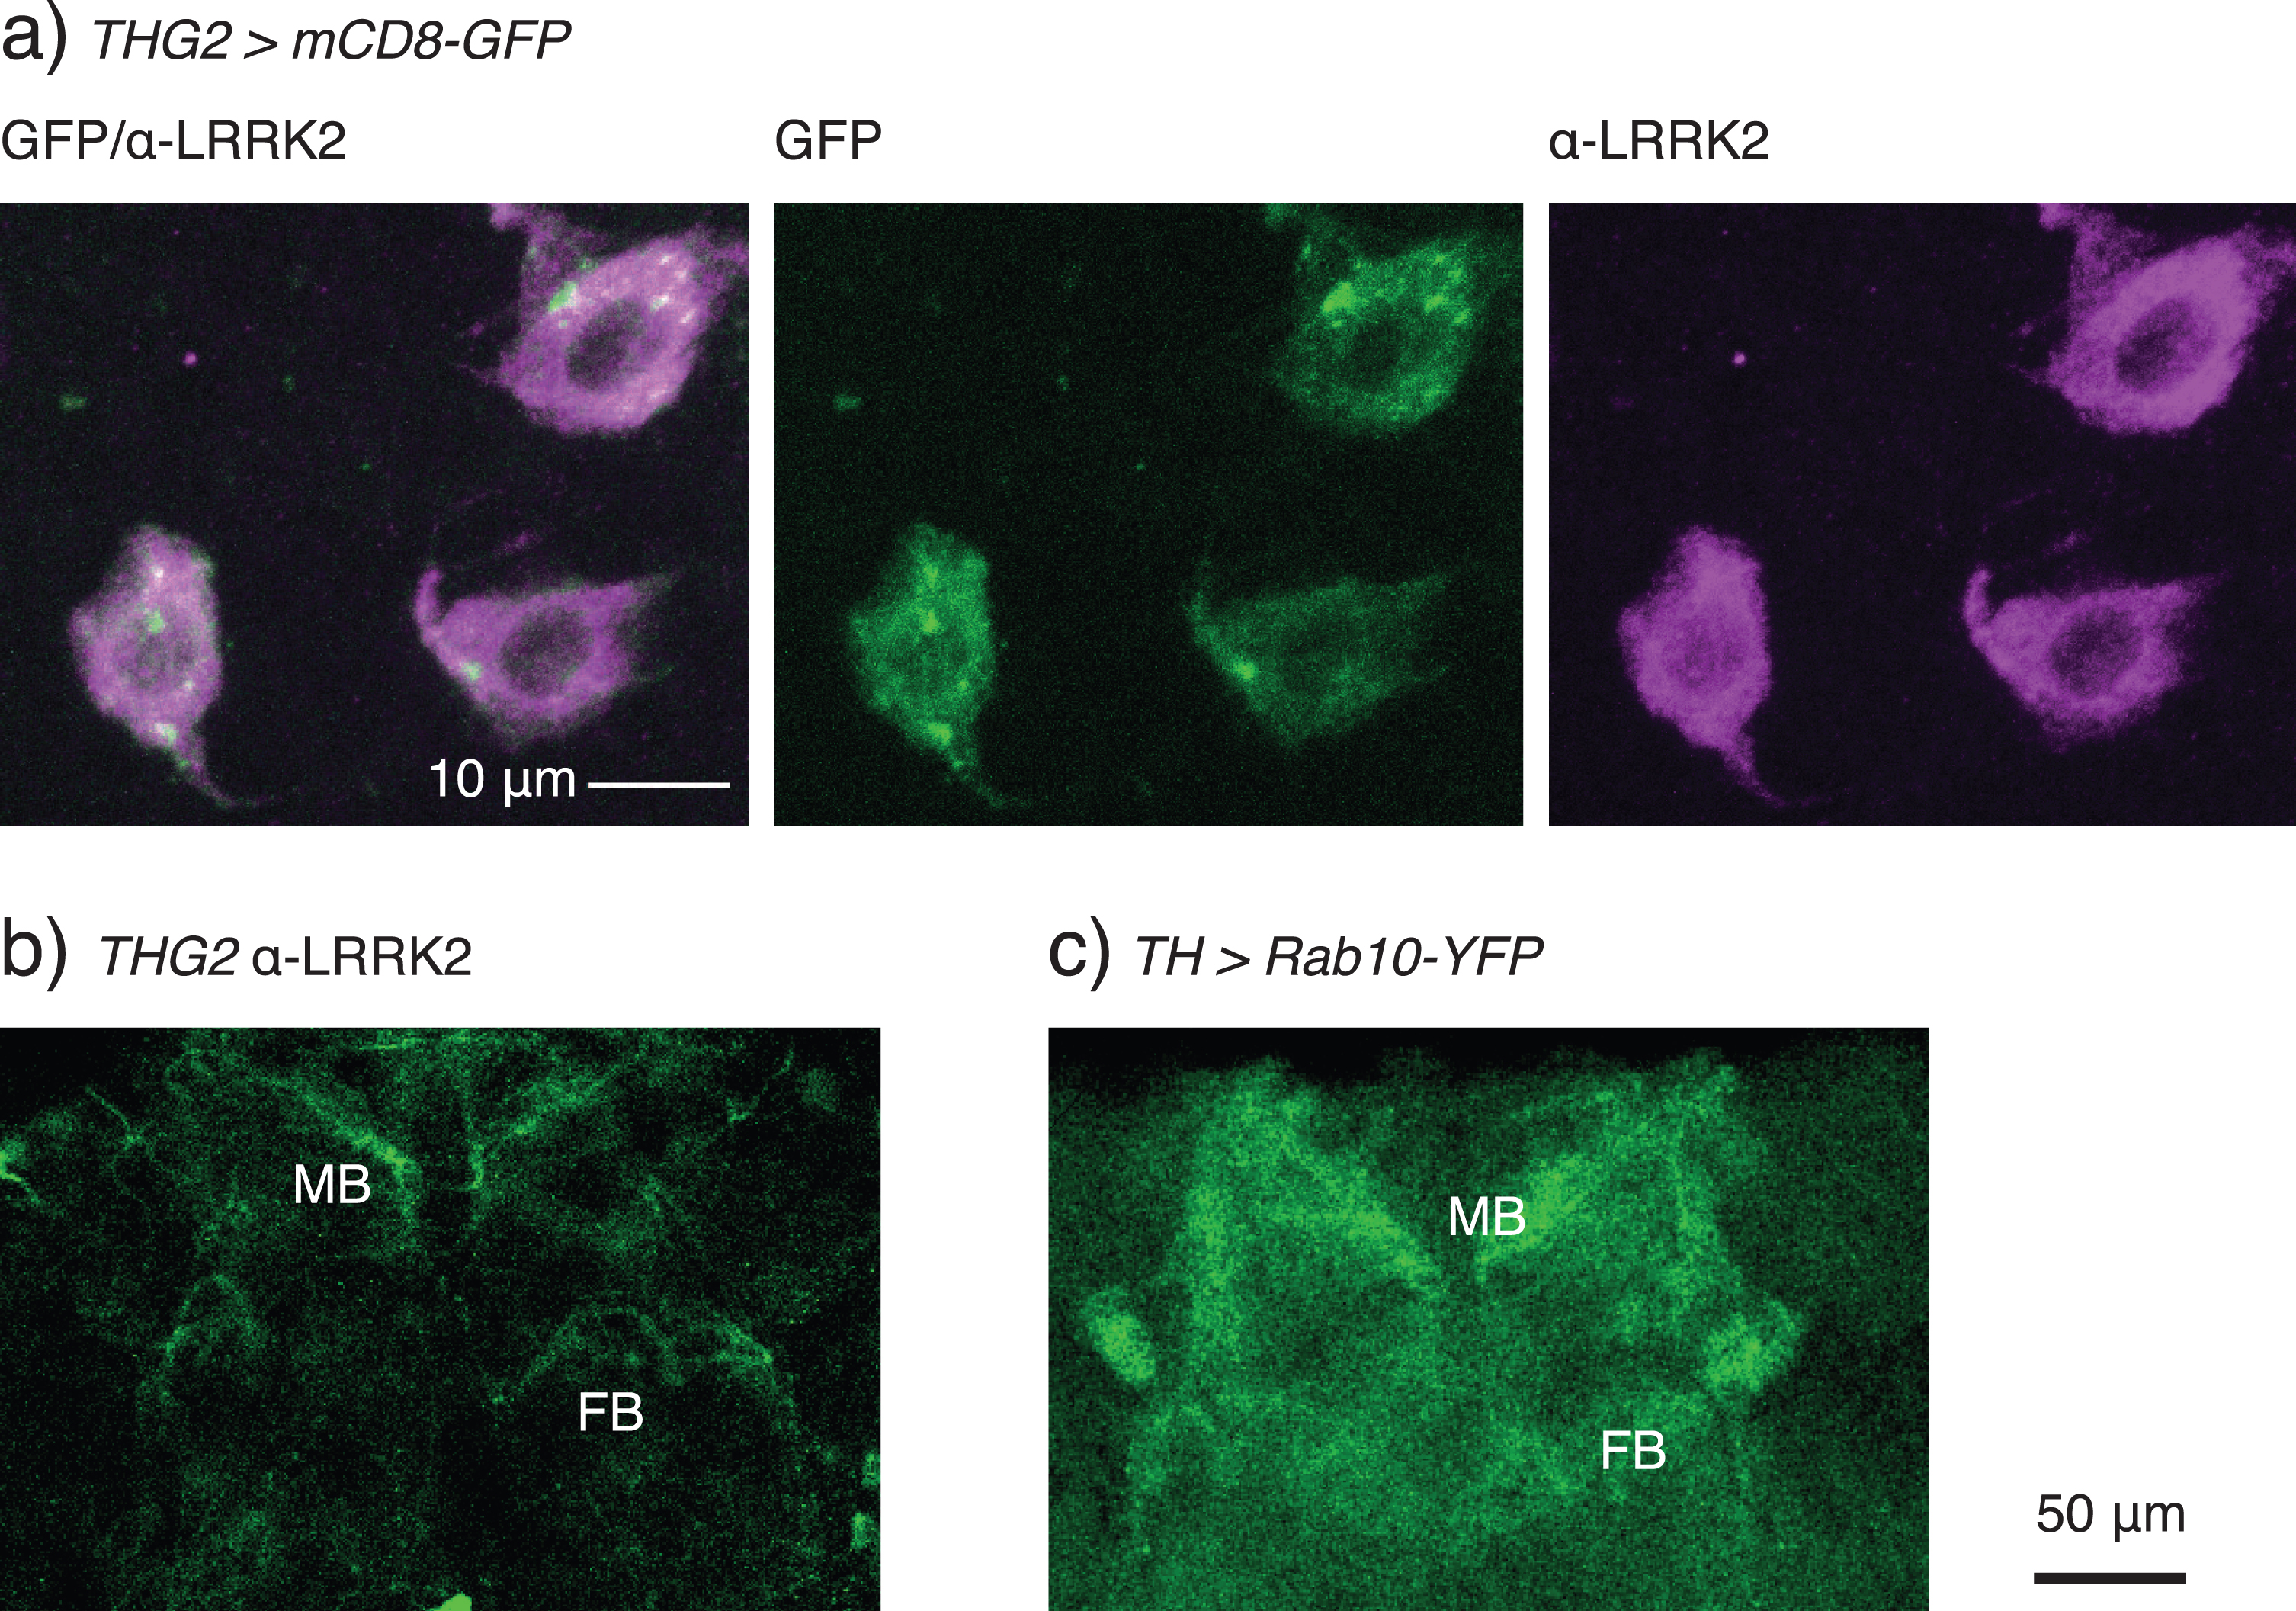 LRRK2-G2019S is found in the cytoplasm of the cell soma and in the synaptic endings of dopaminergic neurons. a) Confocal stack through the TH-VUM and DADN neurons in the ventral part of the brain of a THG2 > mCD8-GFP fly. Note that LRRK2 protein is found more in the cytoplasm than the nucleus, and that there are areas of the cytoplasm with less LRRK2 staining. mCD8-GFP expression is used to mark dopaminergic neurons. The confocal stack spans the whole depth of these dopaminergic neurons. b) LRRK2 is found in the synaptic endings in the mushroom bodies (MB) and weakly in the fan-shaped body (FB). Single confocal section with α-LRRK2 antibody, cropped to select the neuropil. c) Dopaminergically expressed Rab10-YFP is found in the same synaptic neuropils. Stack of two confocal images, cropped to include just the neuropil. Images representative of at least 3 preparations. Exact genotypes in Supplementary Table 7.